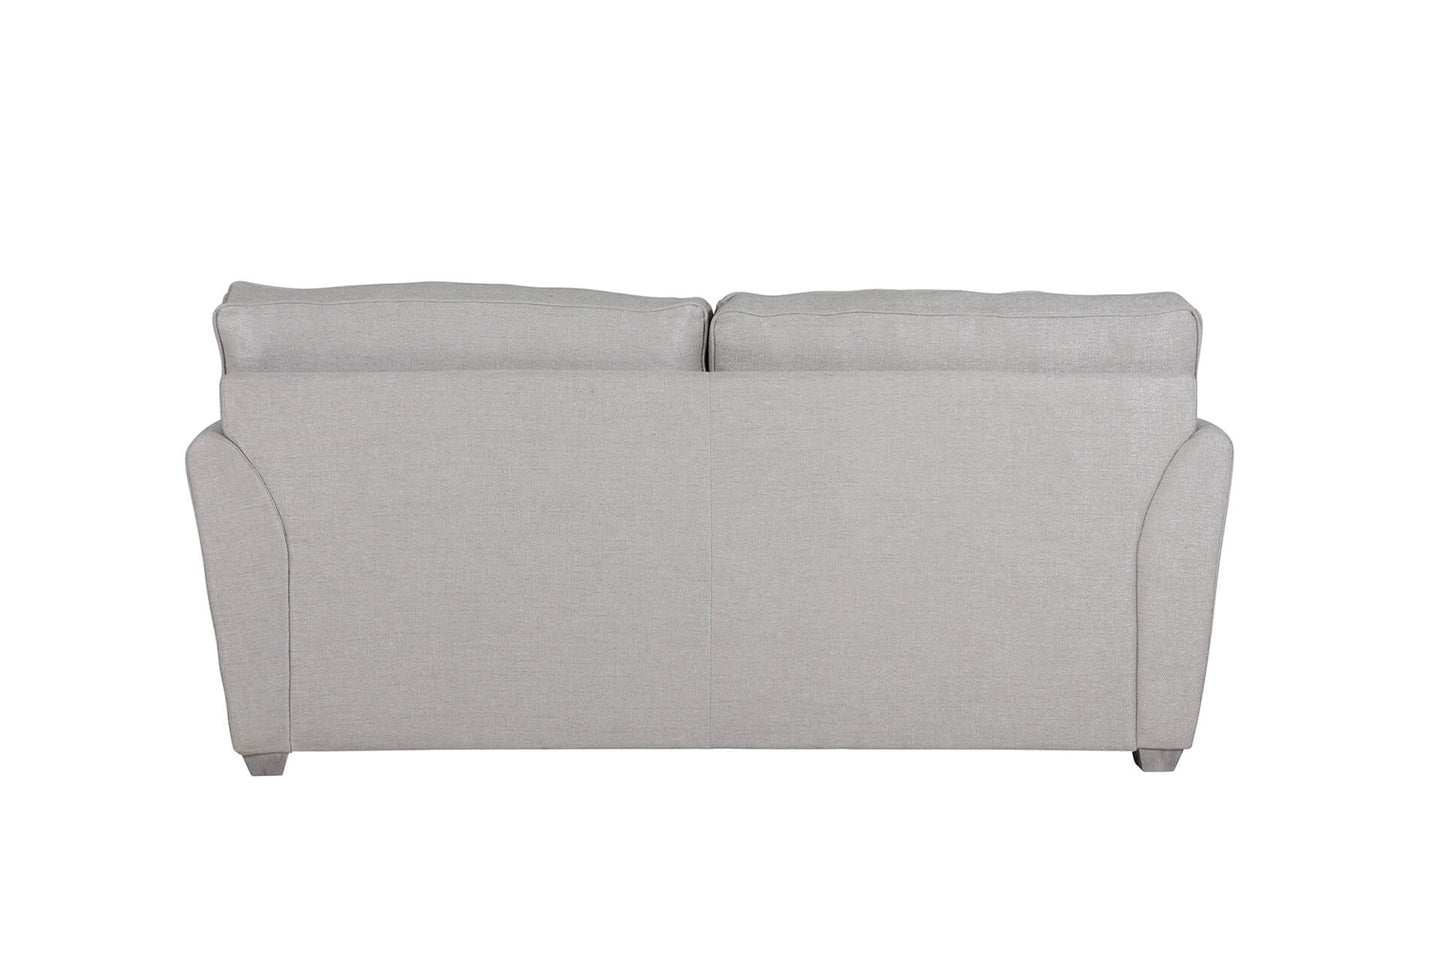 Cantrell Sofa Bed - Light Grey